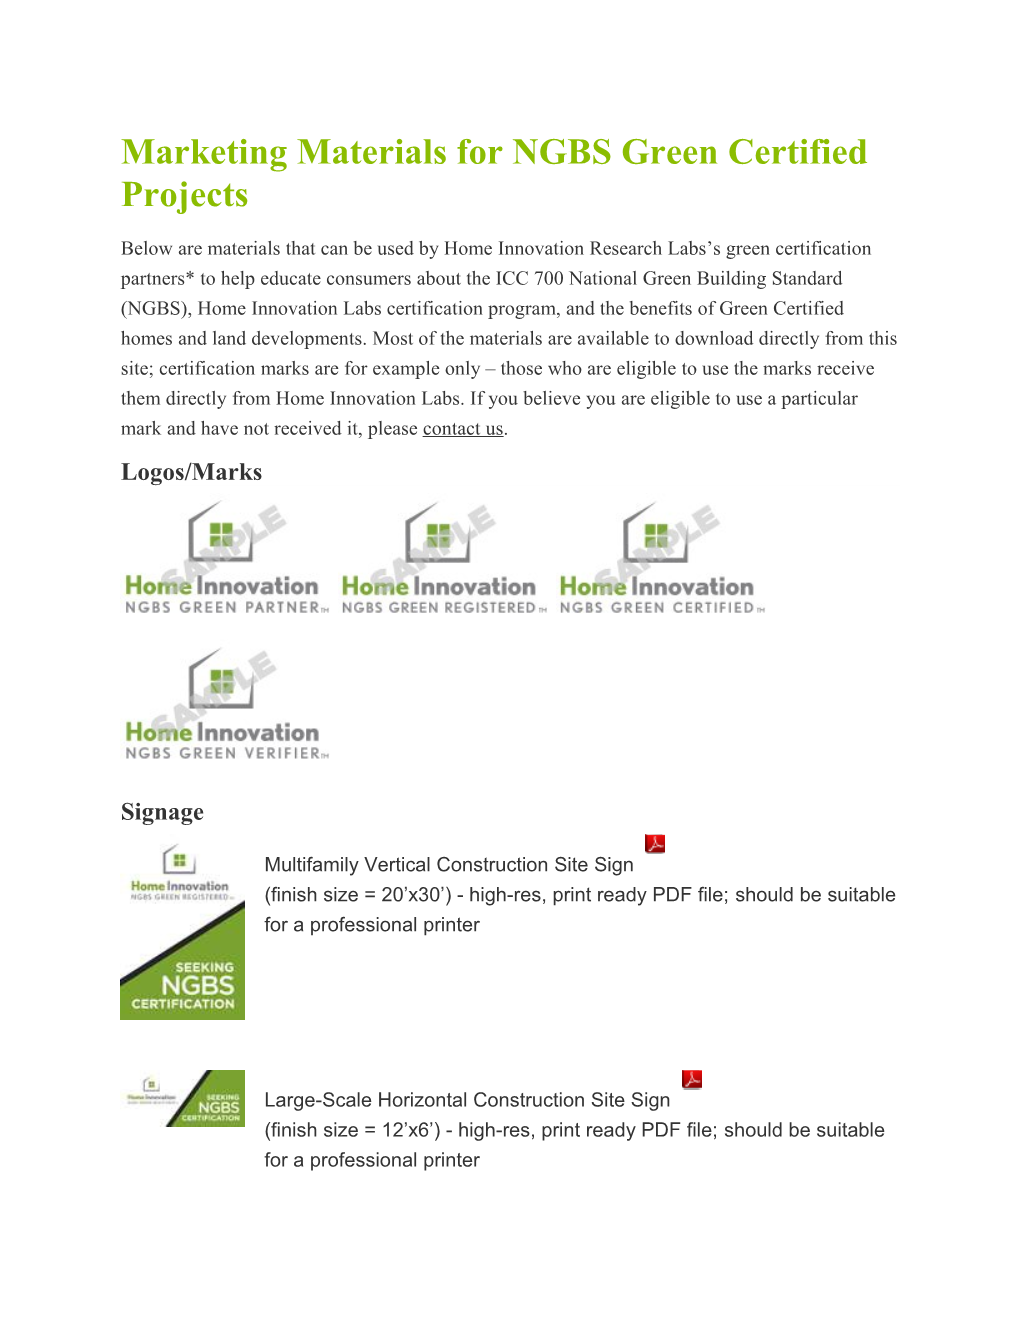 Marketing Materials for NGBS Green Certified Projects